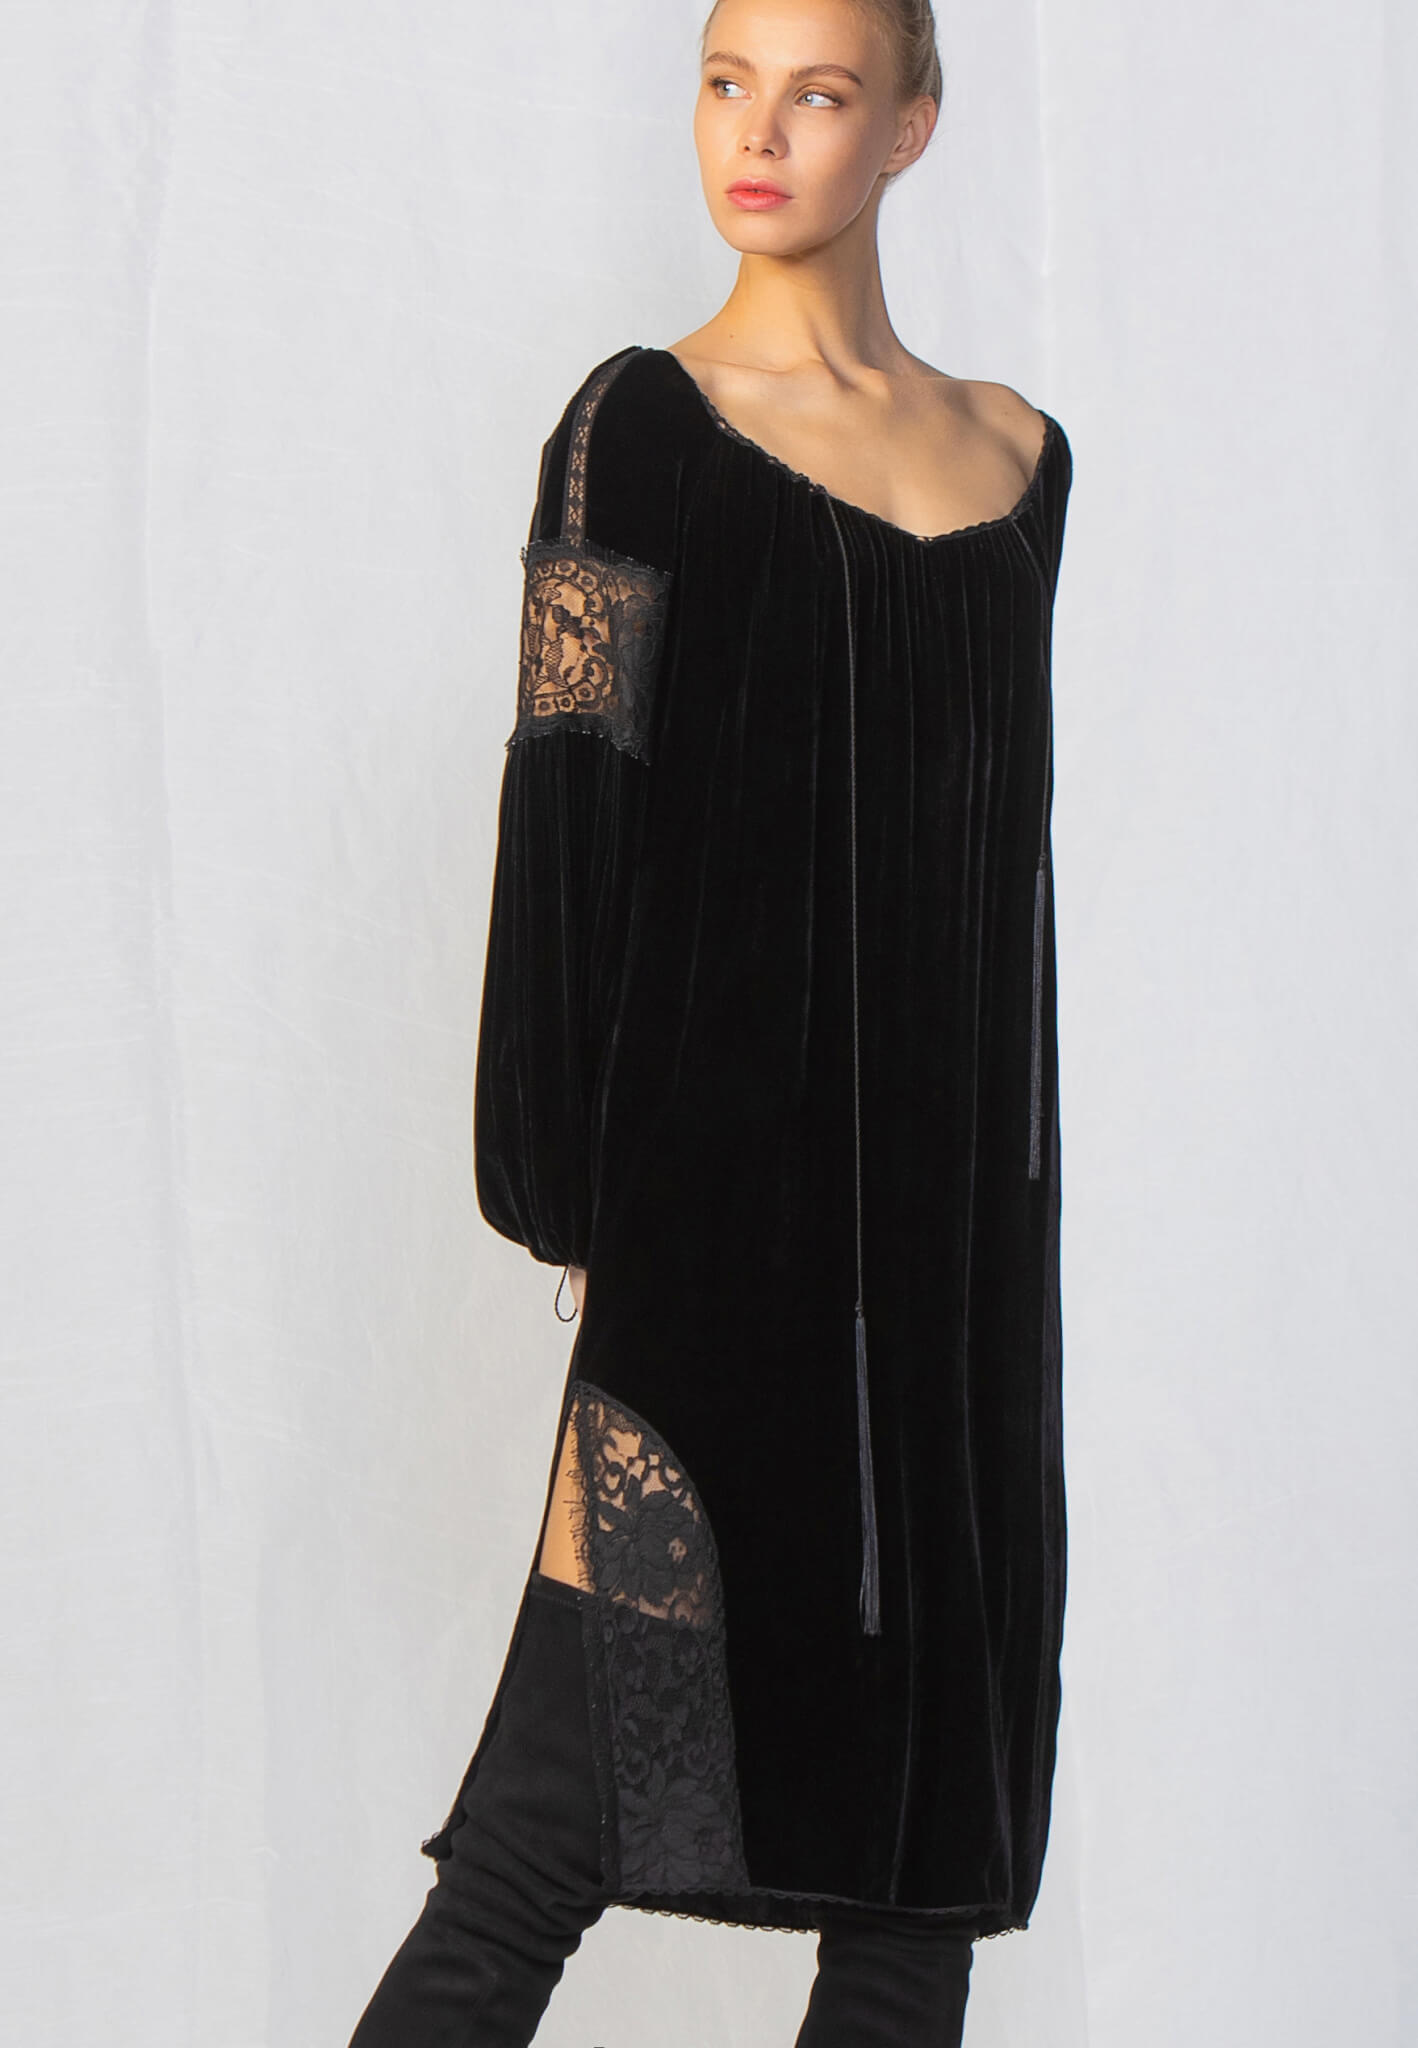 Black velour dress with lace